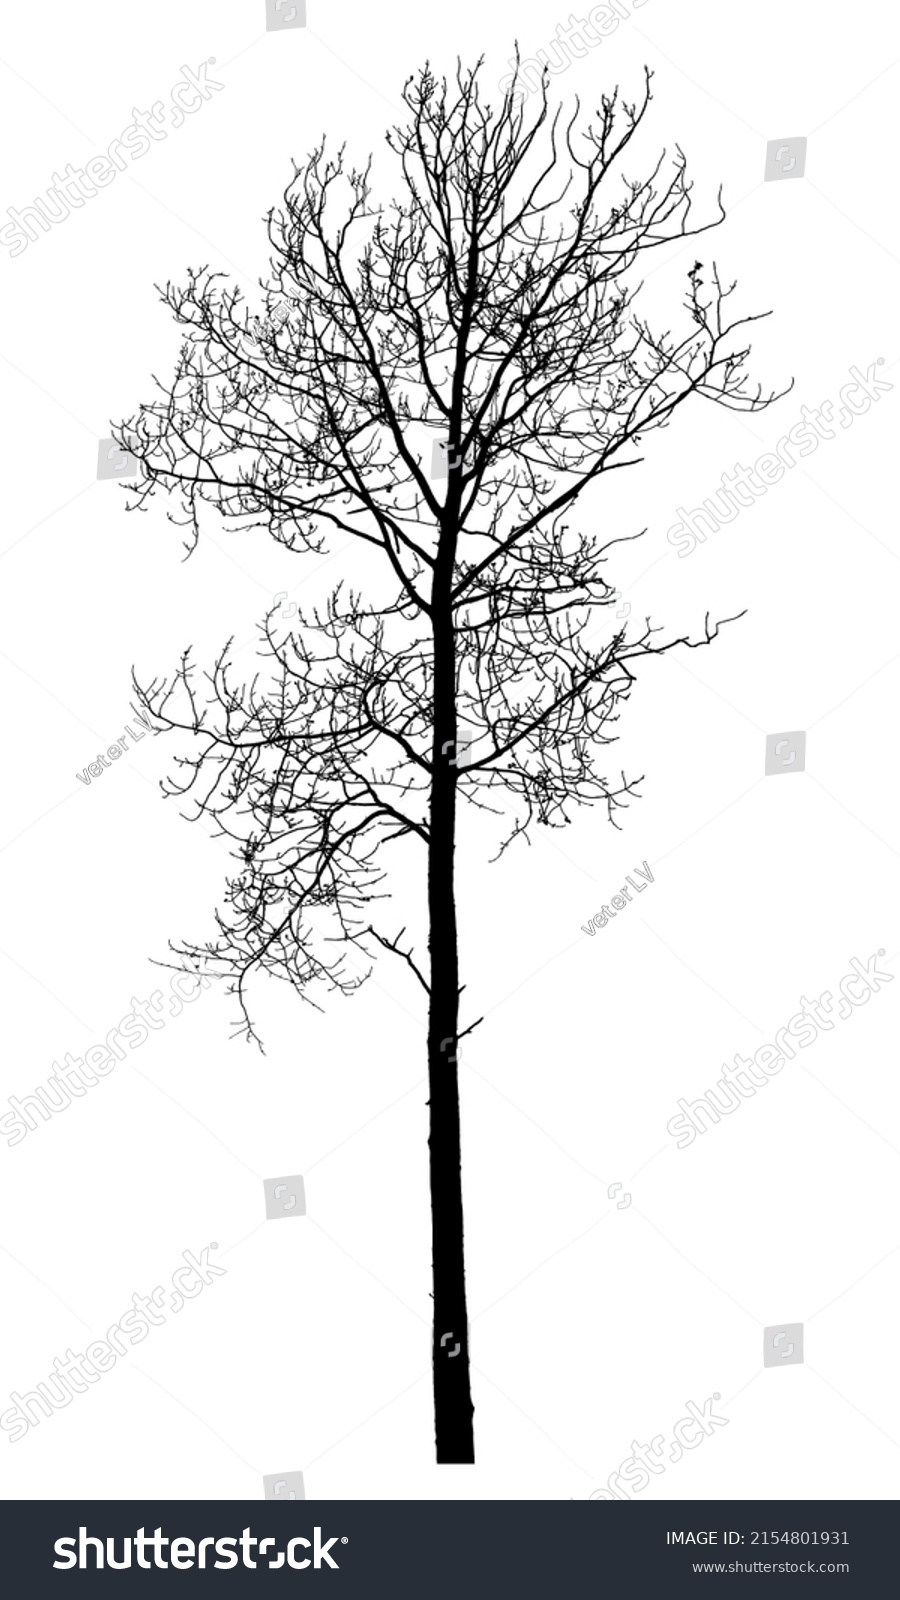 SVG of Silhouette of a tree on a white background. Vector realistic black and white illustration of aspen. svg